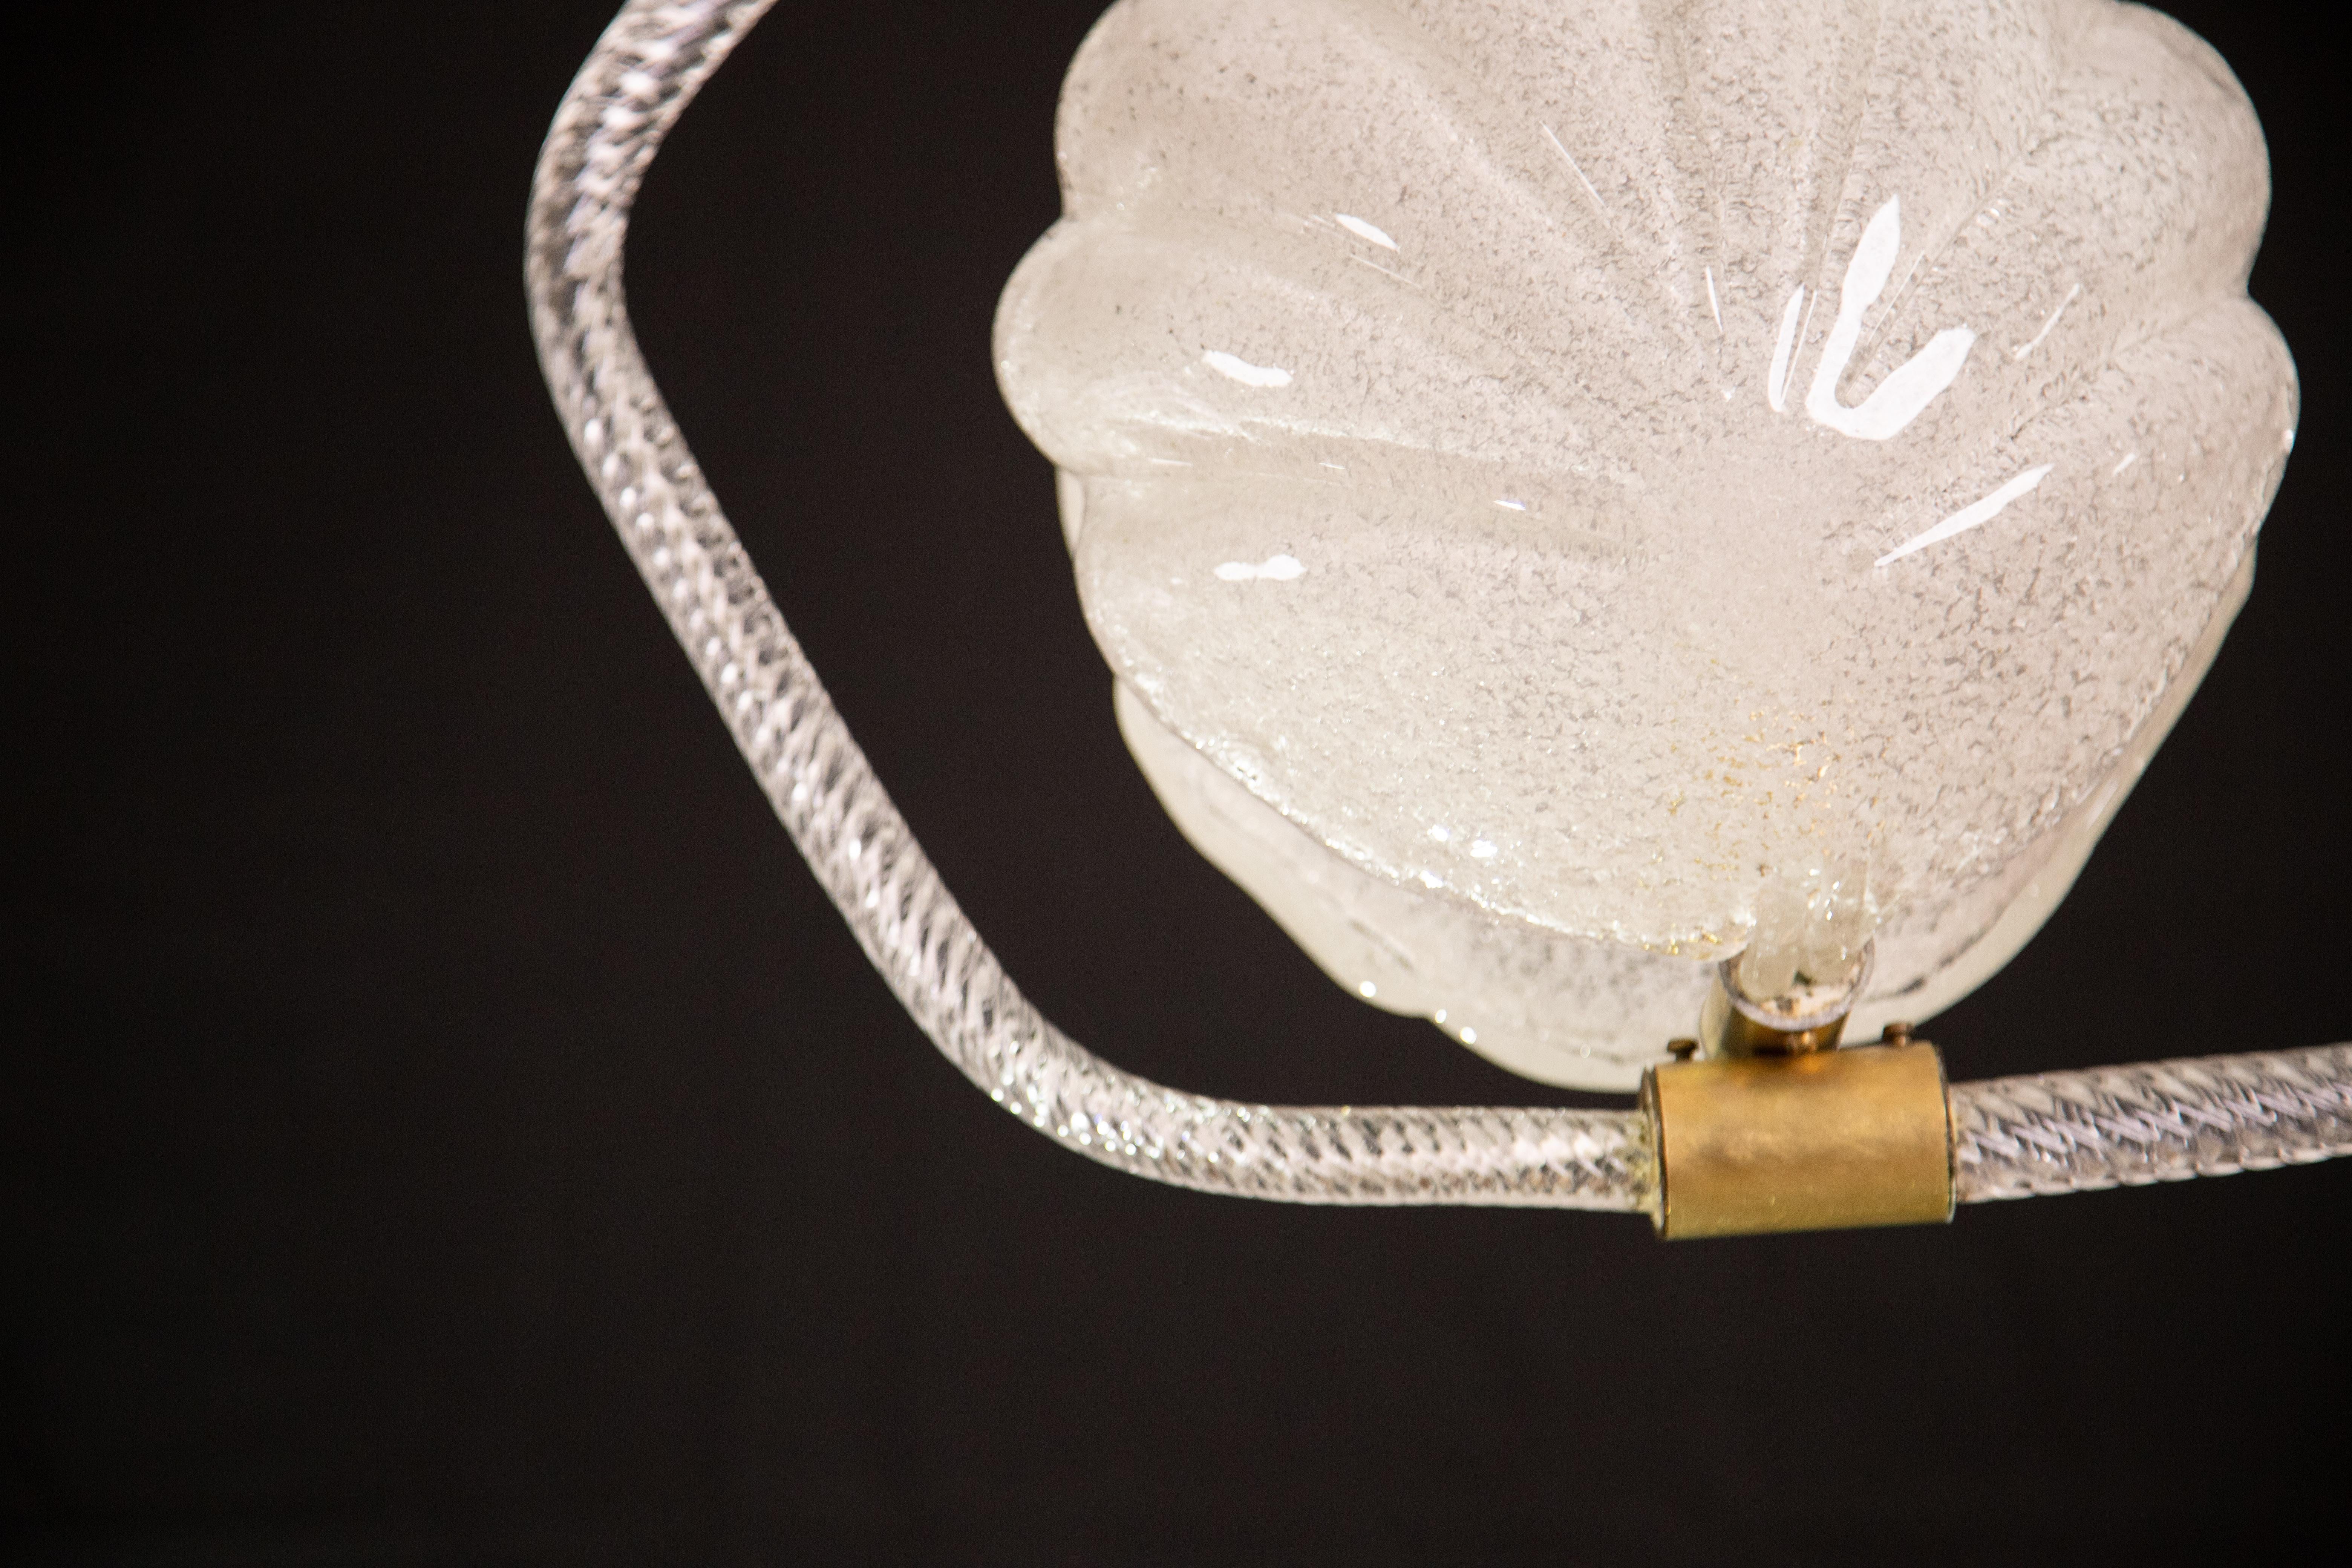 Shell Trasparent Murano Glass Chandelier by Barovier e Toso, 1940s For Sale 4